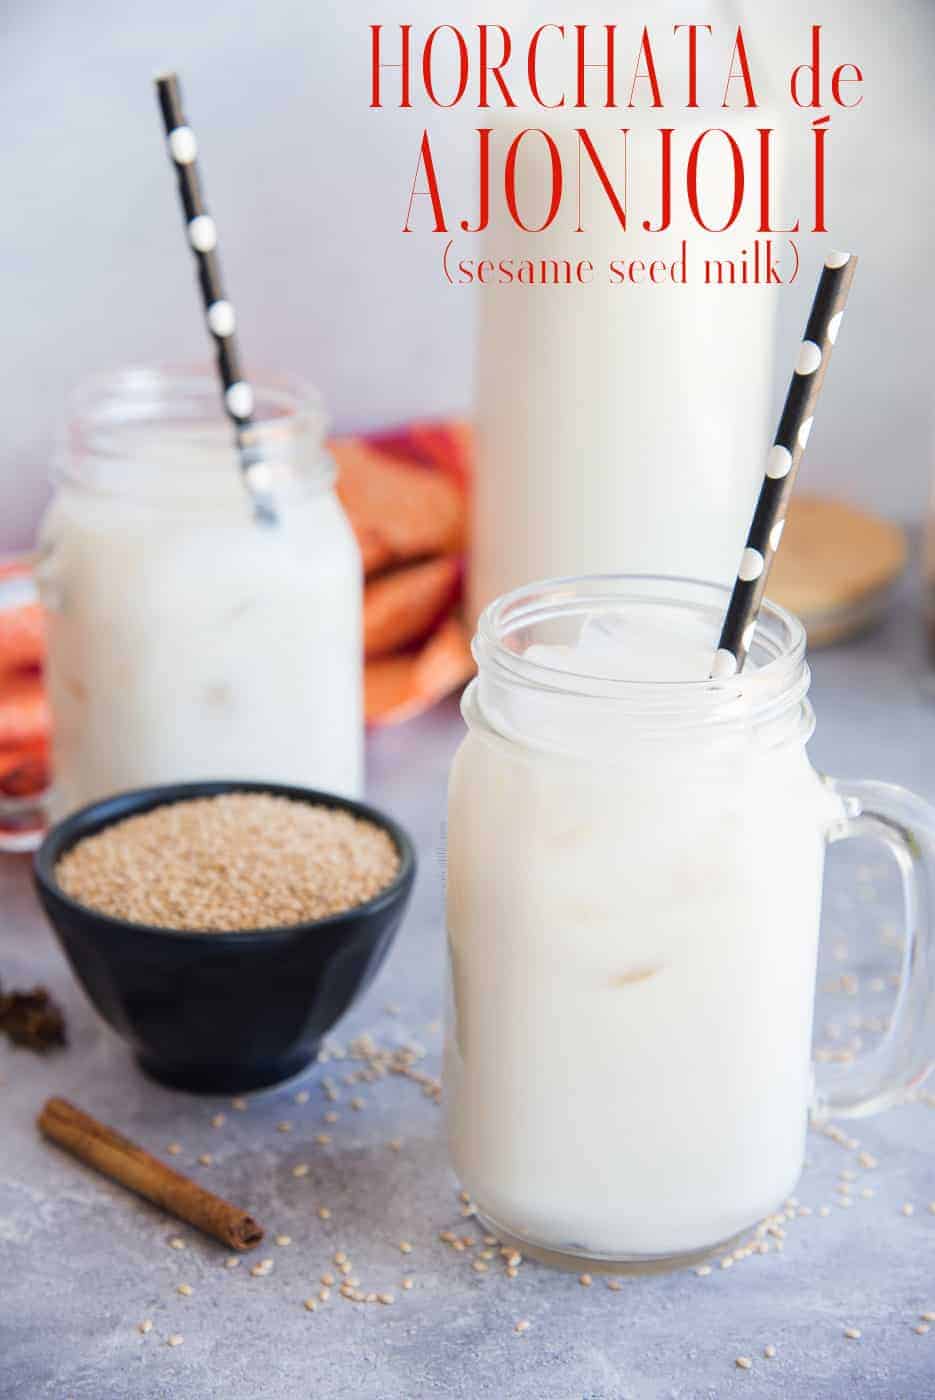 Horchata de Ajonjolí is a unique plant milk made from toasted sesame seeds and sweetened with sweetened condensed cow's milk or coconut milk for a vegan version. This horchata has a mild peanutty flavor, which is very refreshing and nice change of pace. #horchata #horchatadeajonjolí #sesamemilk #sesameseedmilk #plantmilk #plantbasedmilk #recetaspuertorriqueñas #PuertoRicanRecipes #puertoricanhorchata #ajonjolí #horchatarecipe #recetadehorchata #PuertoRican #toastedsesameseeds via @ediblesense